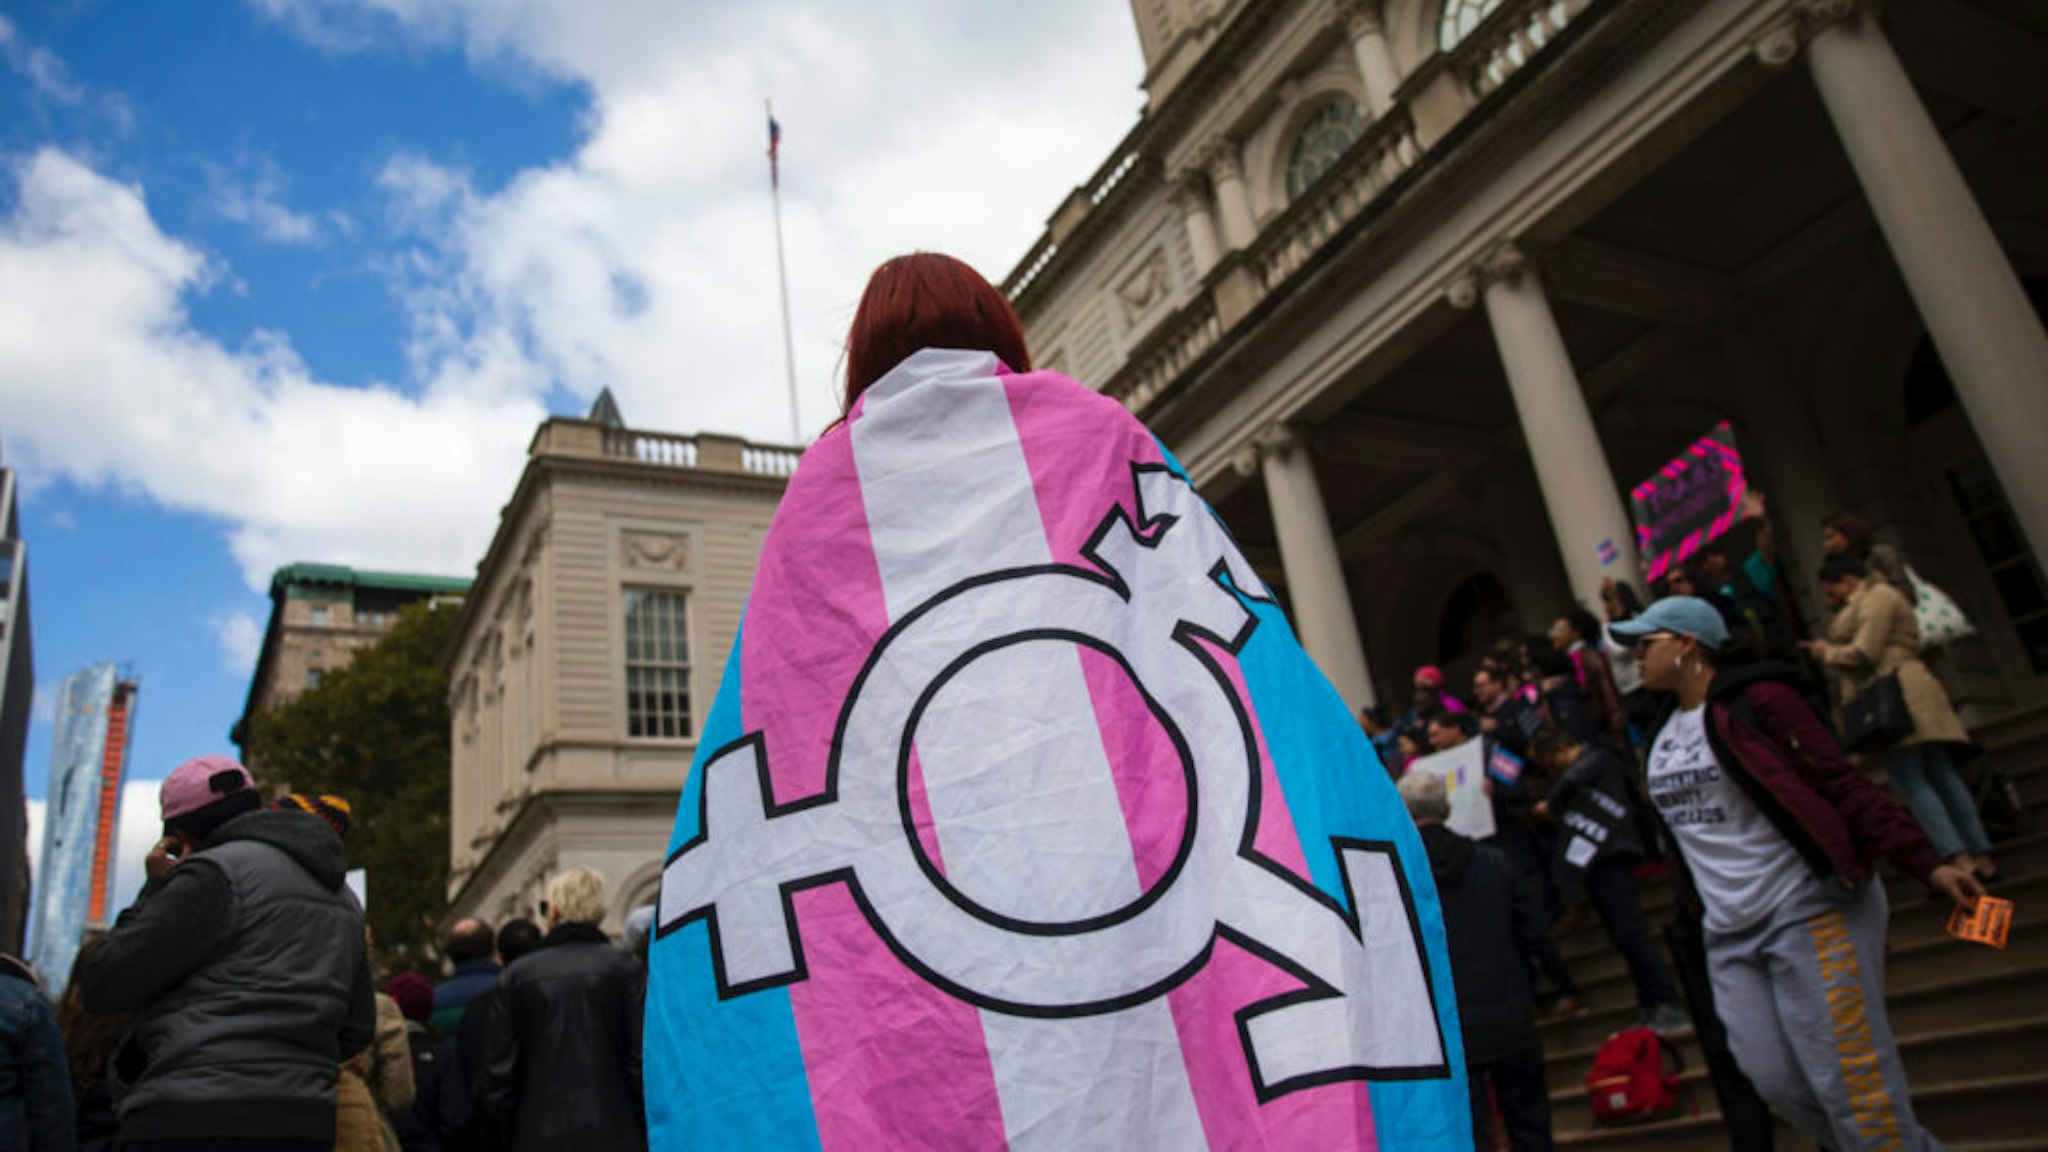 L.G.B.T. activists and their supporters rally in support of transgender people on the steps of New York City Hall, October 24, 2018 in New York City.